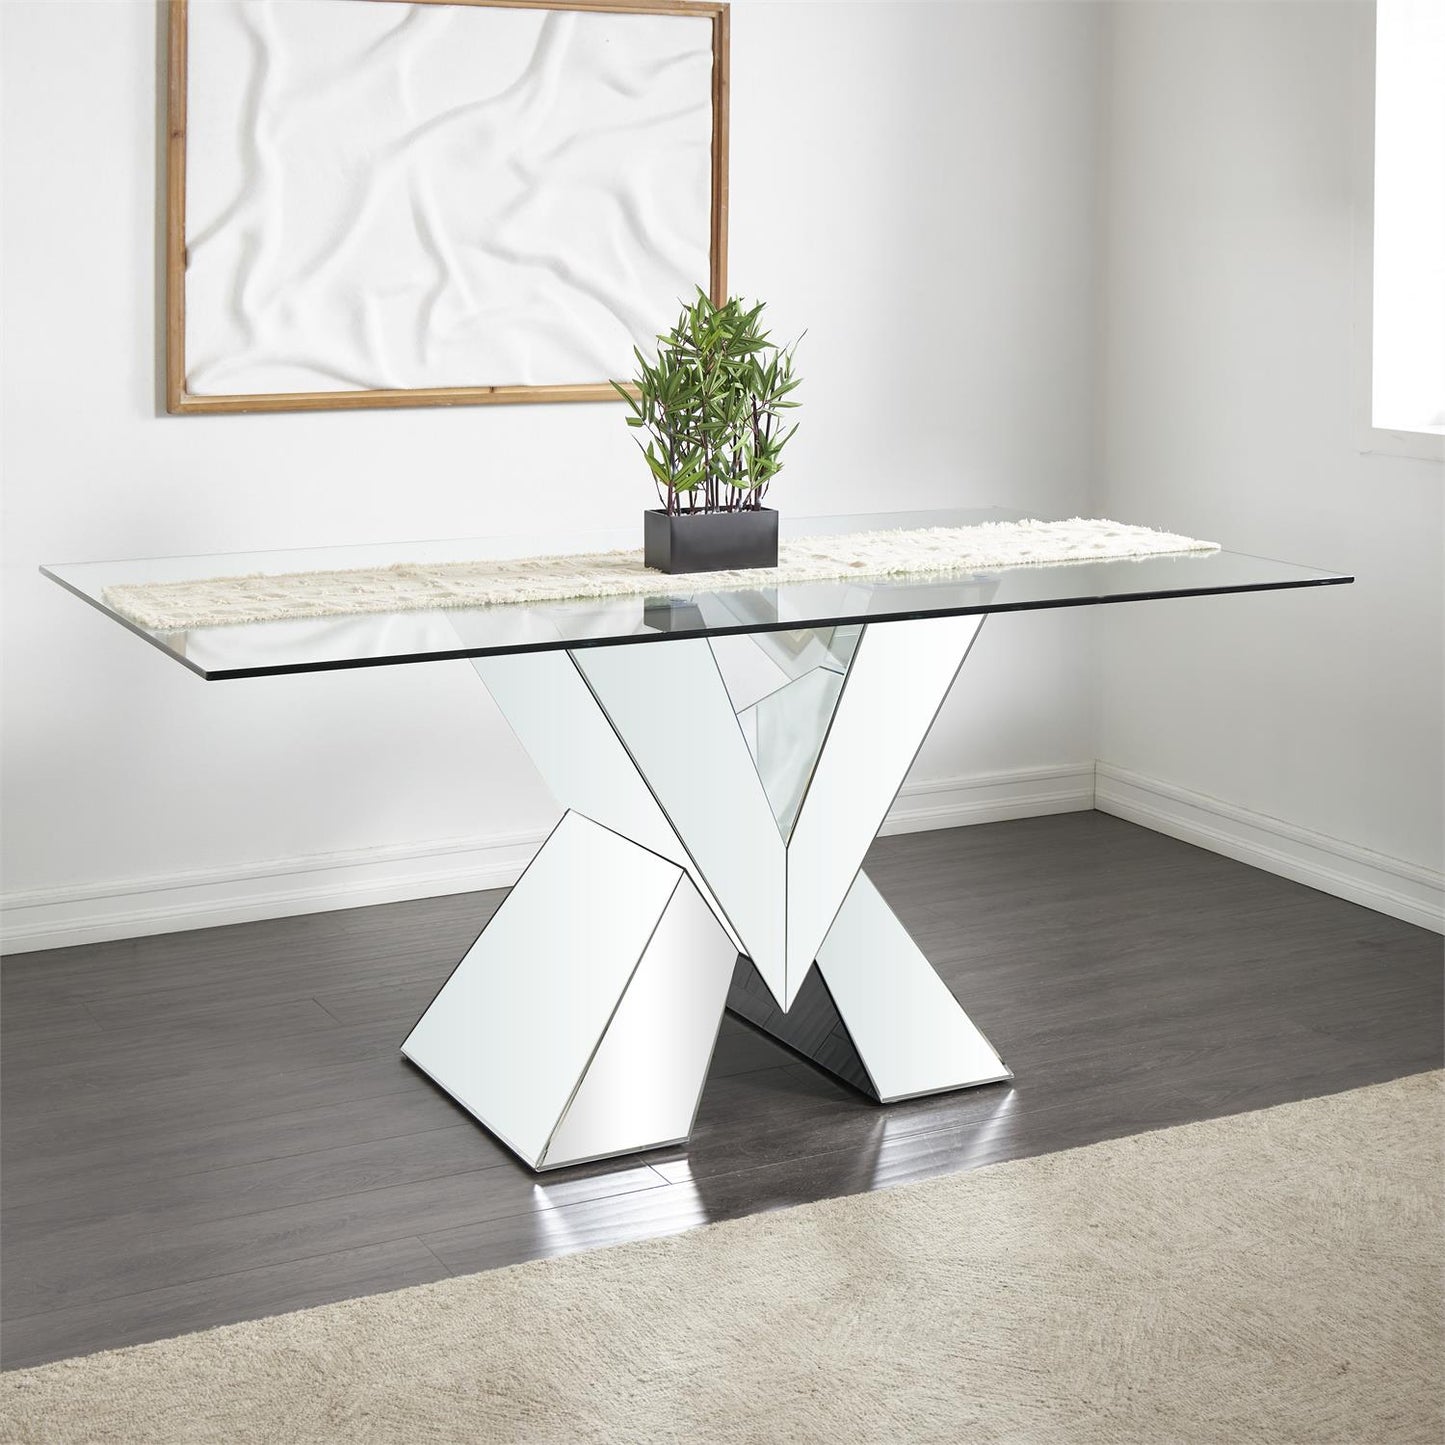 SILVER WOOD DINING TABLE, 71" X 40" X 31"  CLEARANCE SALE